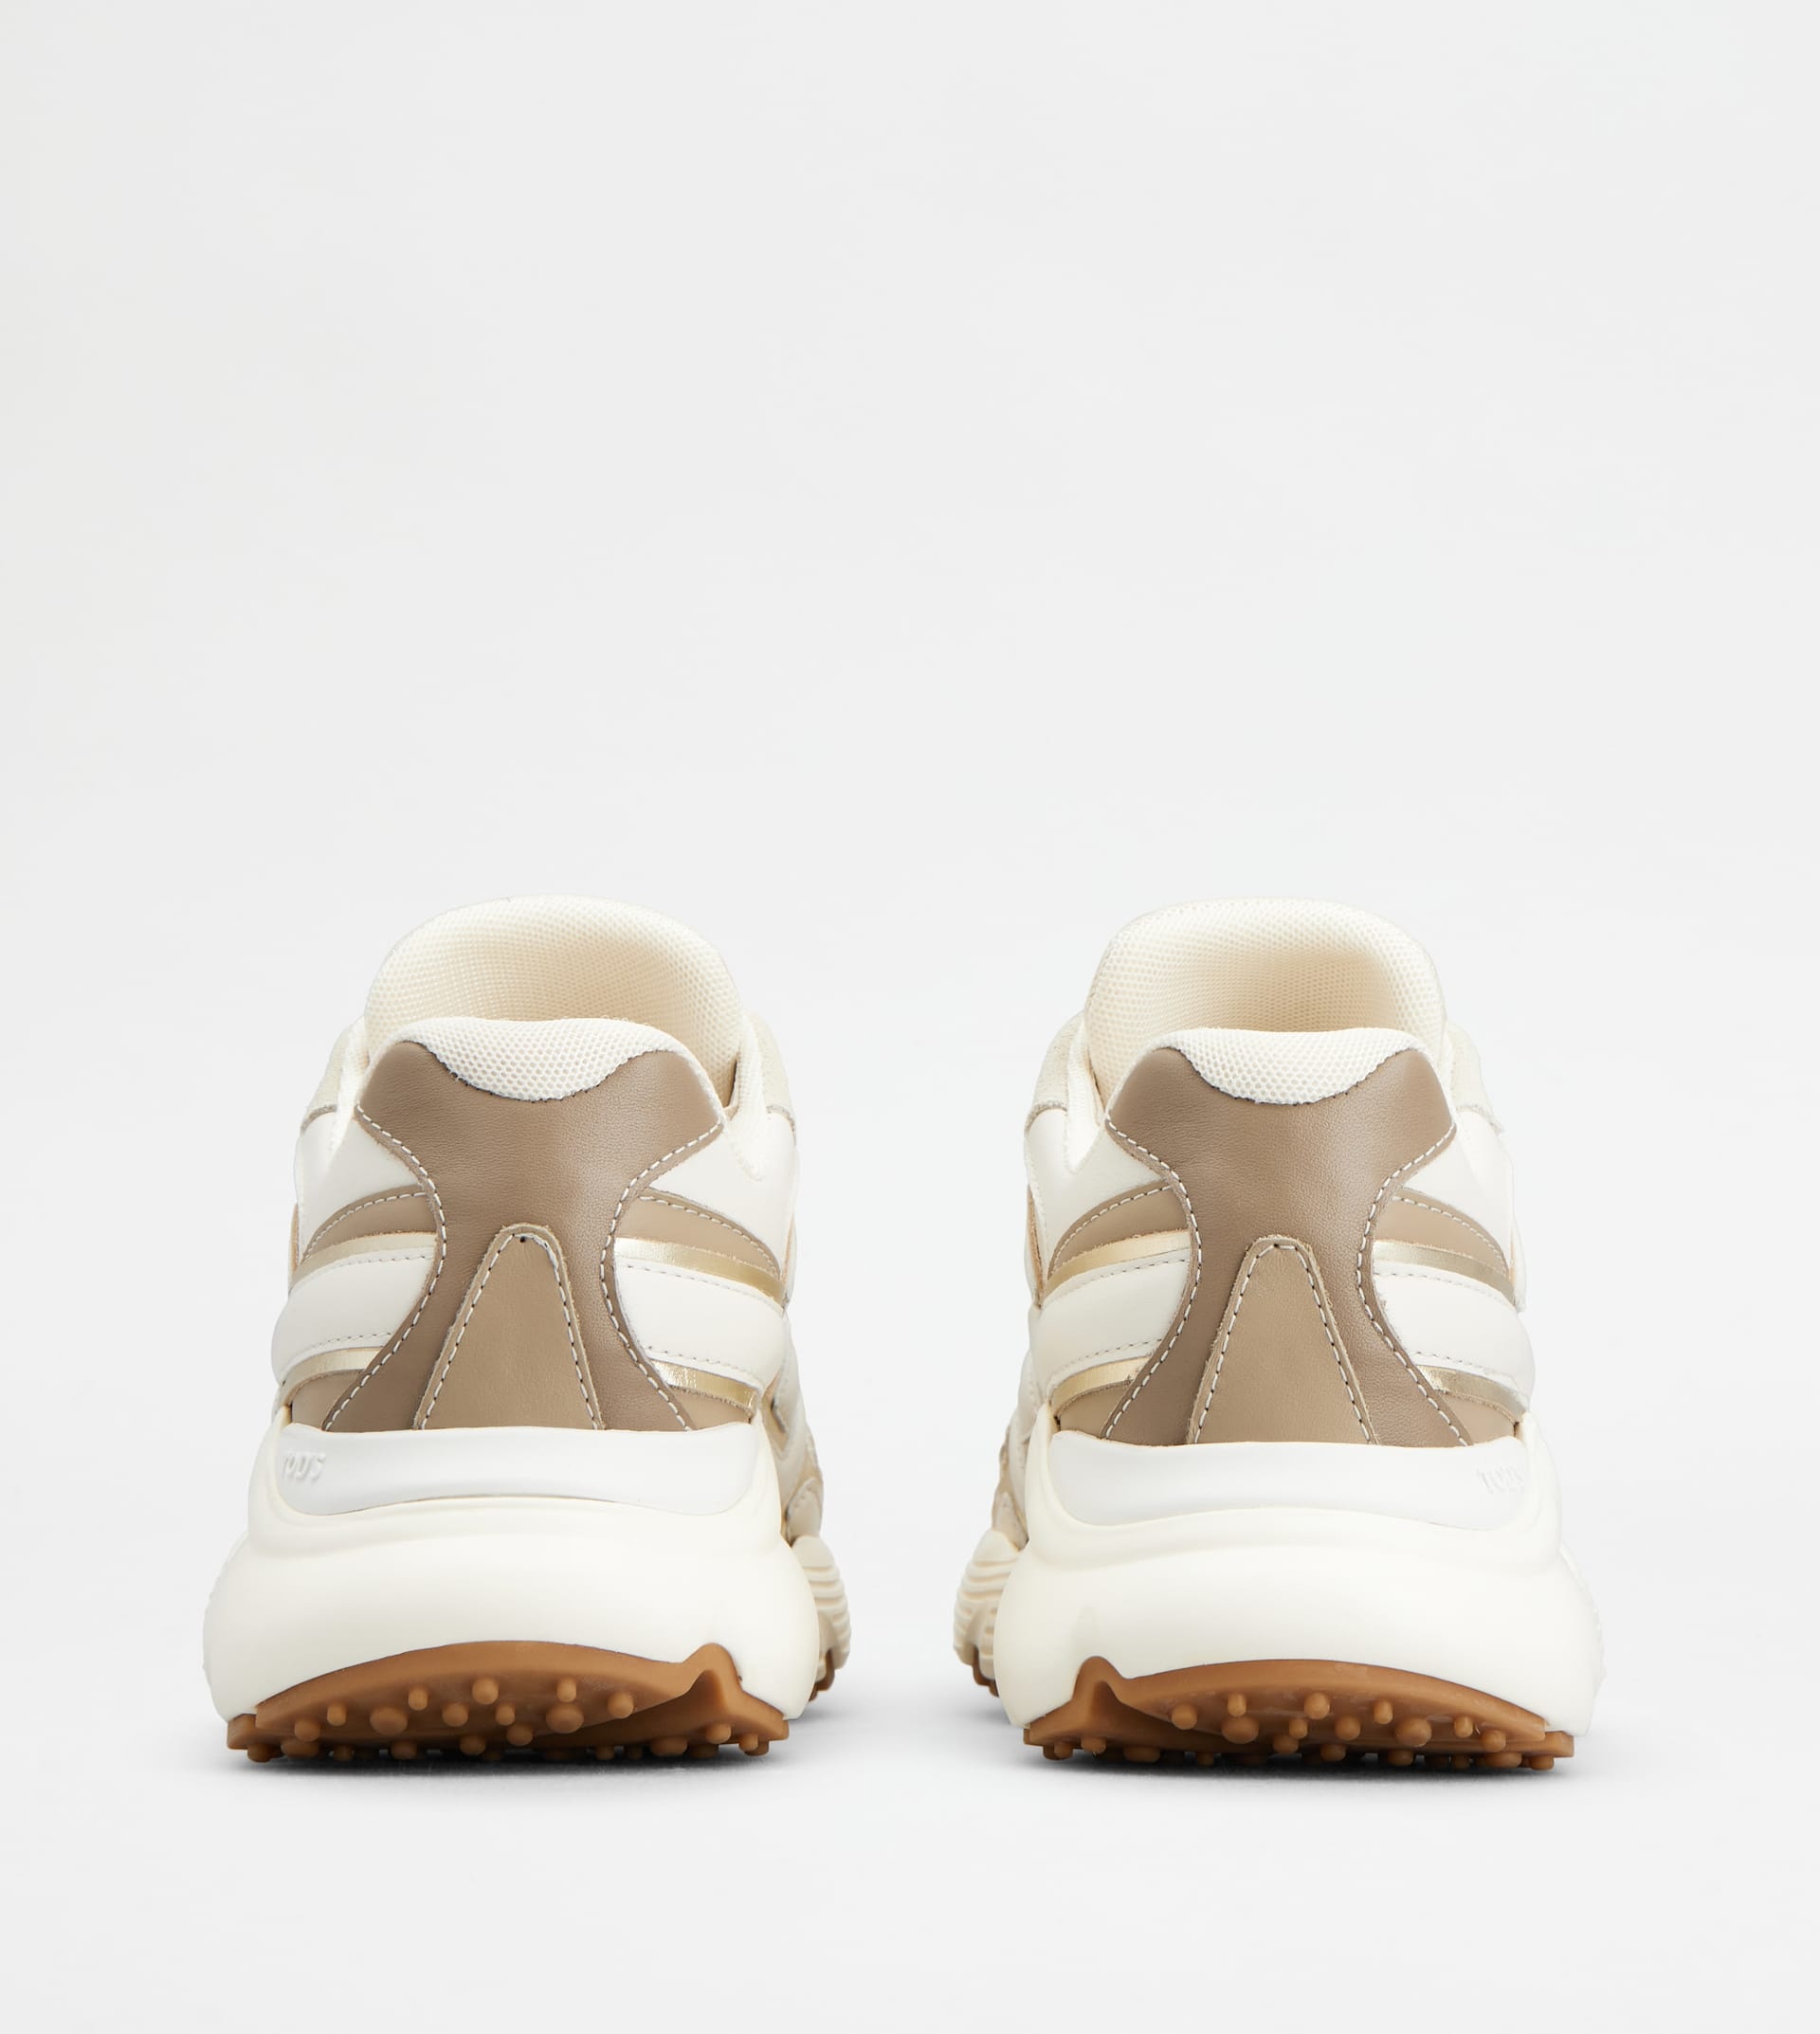 SNEAKERS IN LEATHER AND FABRIC - BEIGE, WHITE, GOLD - 2